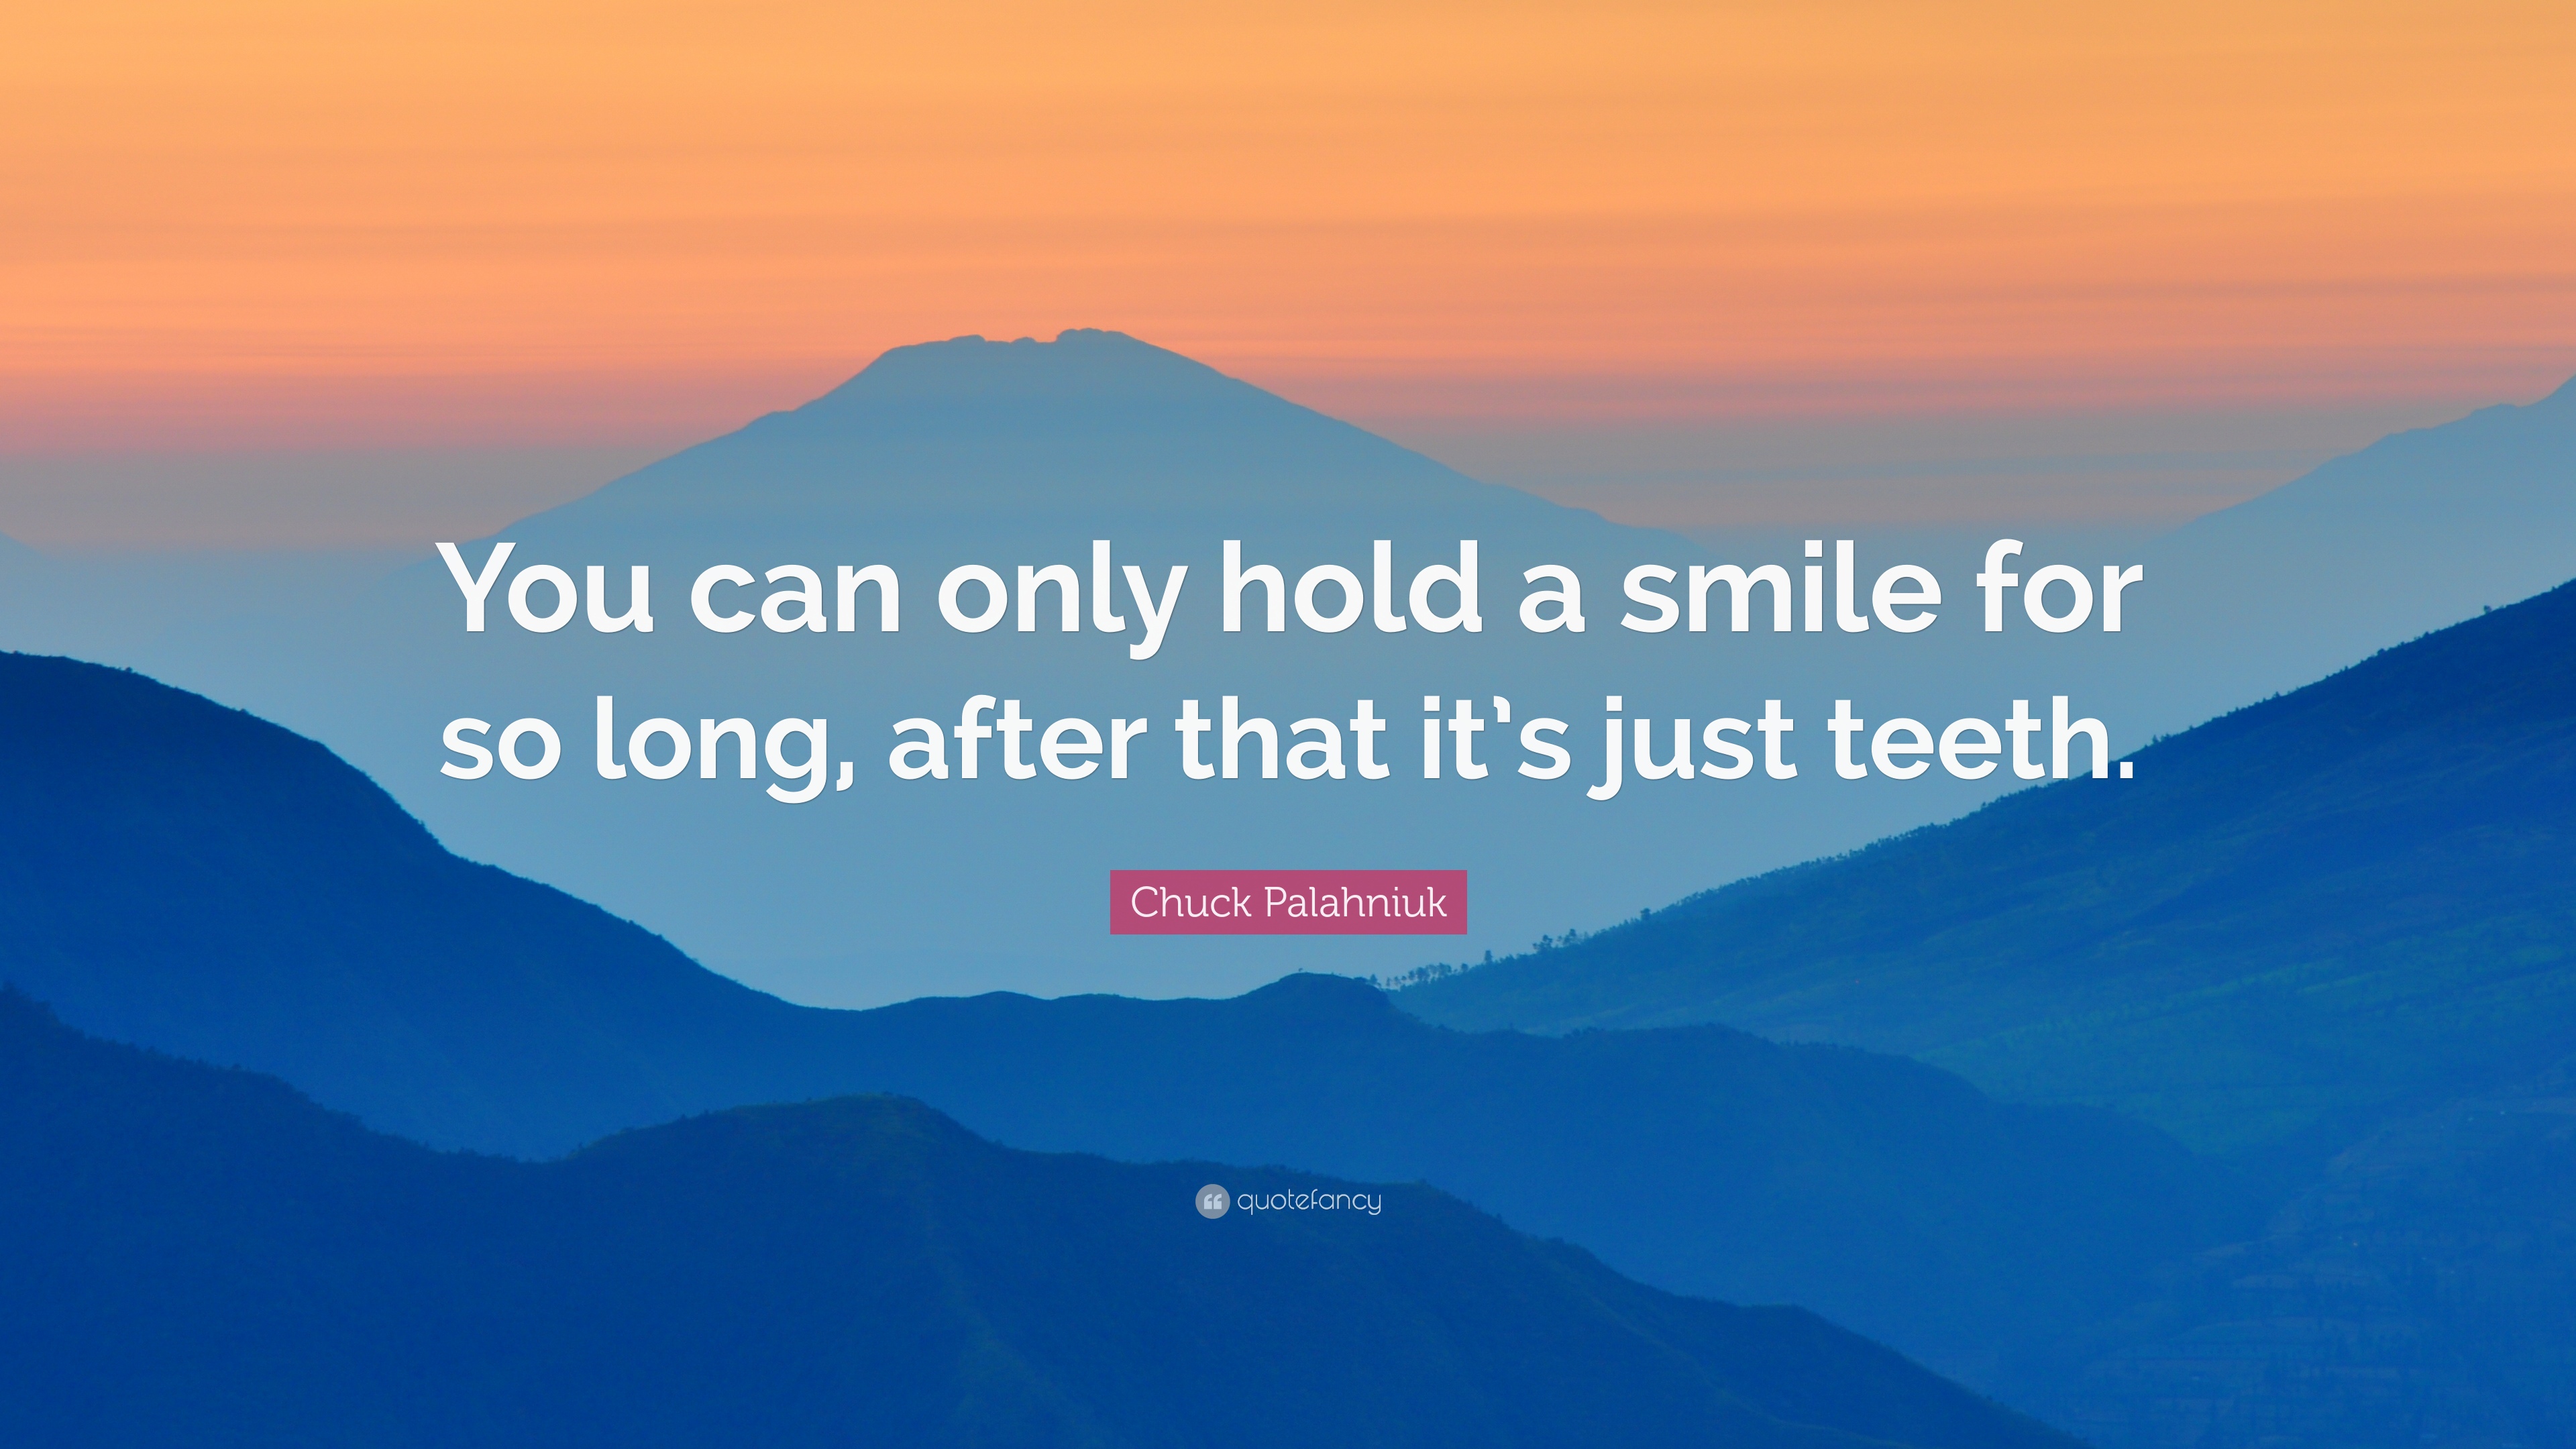 Chuck Palahniuk Quote: “You can only hold a smile for so long, after ...